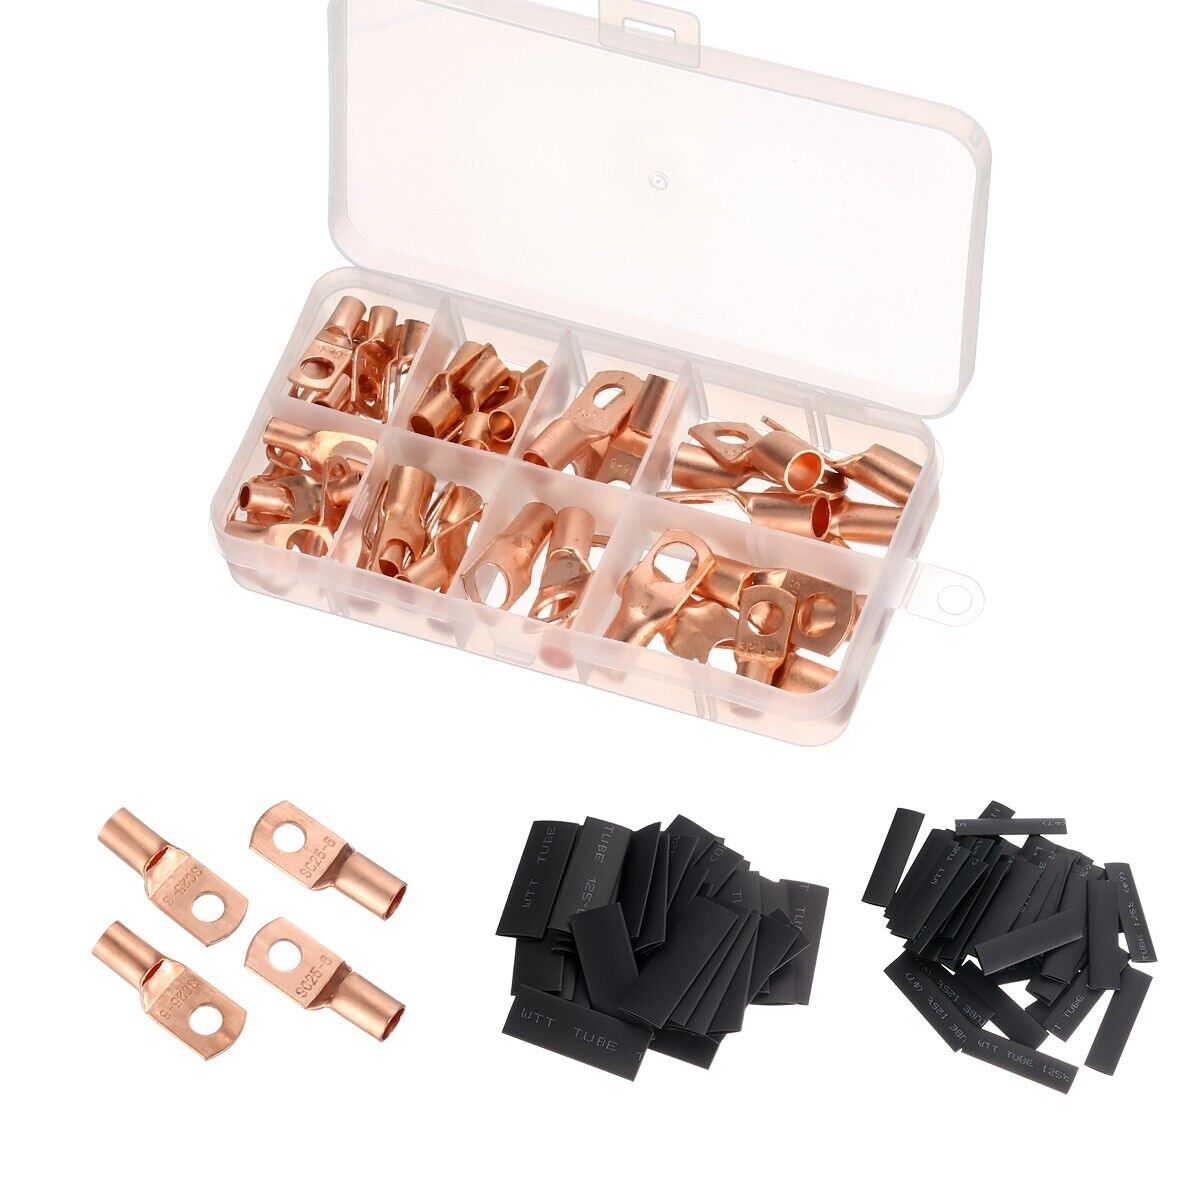 140pcs Copper Wire Lugs Battery Cable Ends Terminal Connectors Assortment Kit US Unbranded Does not apply - фотография #13